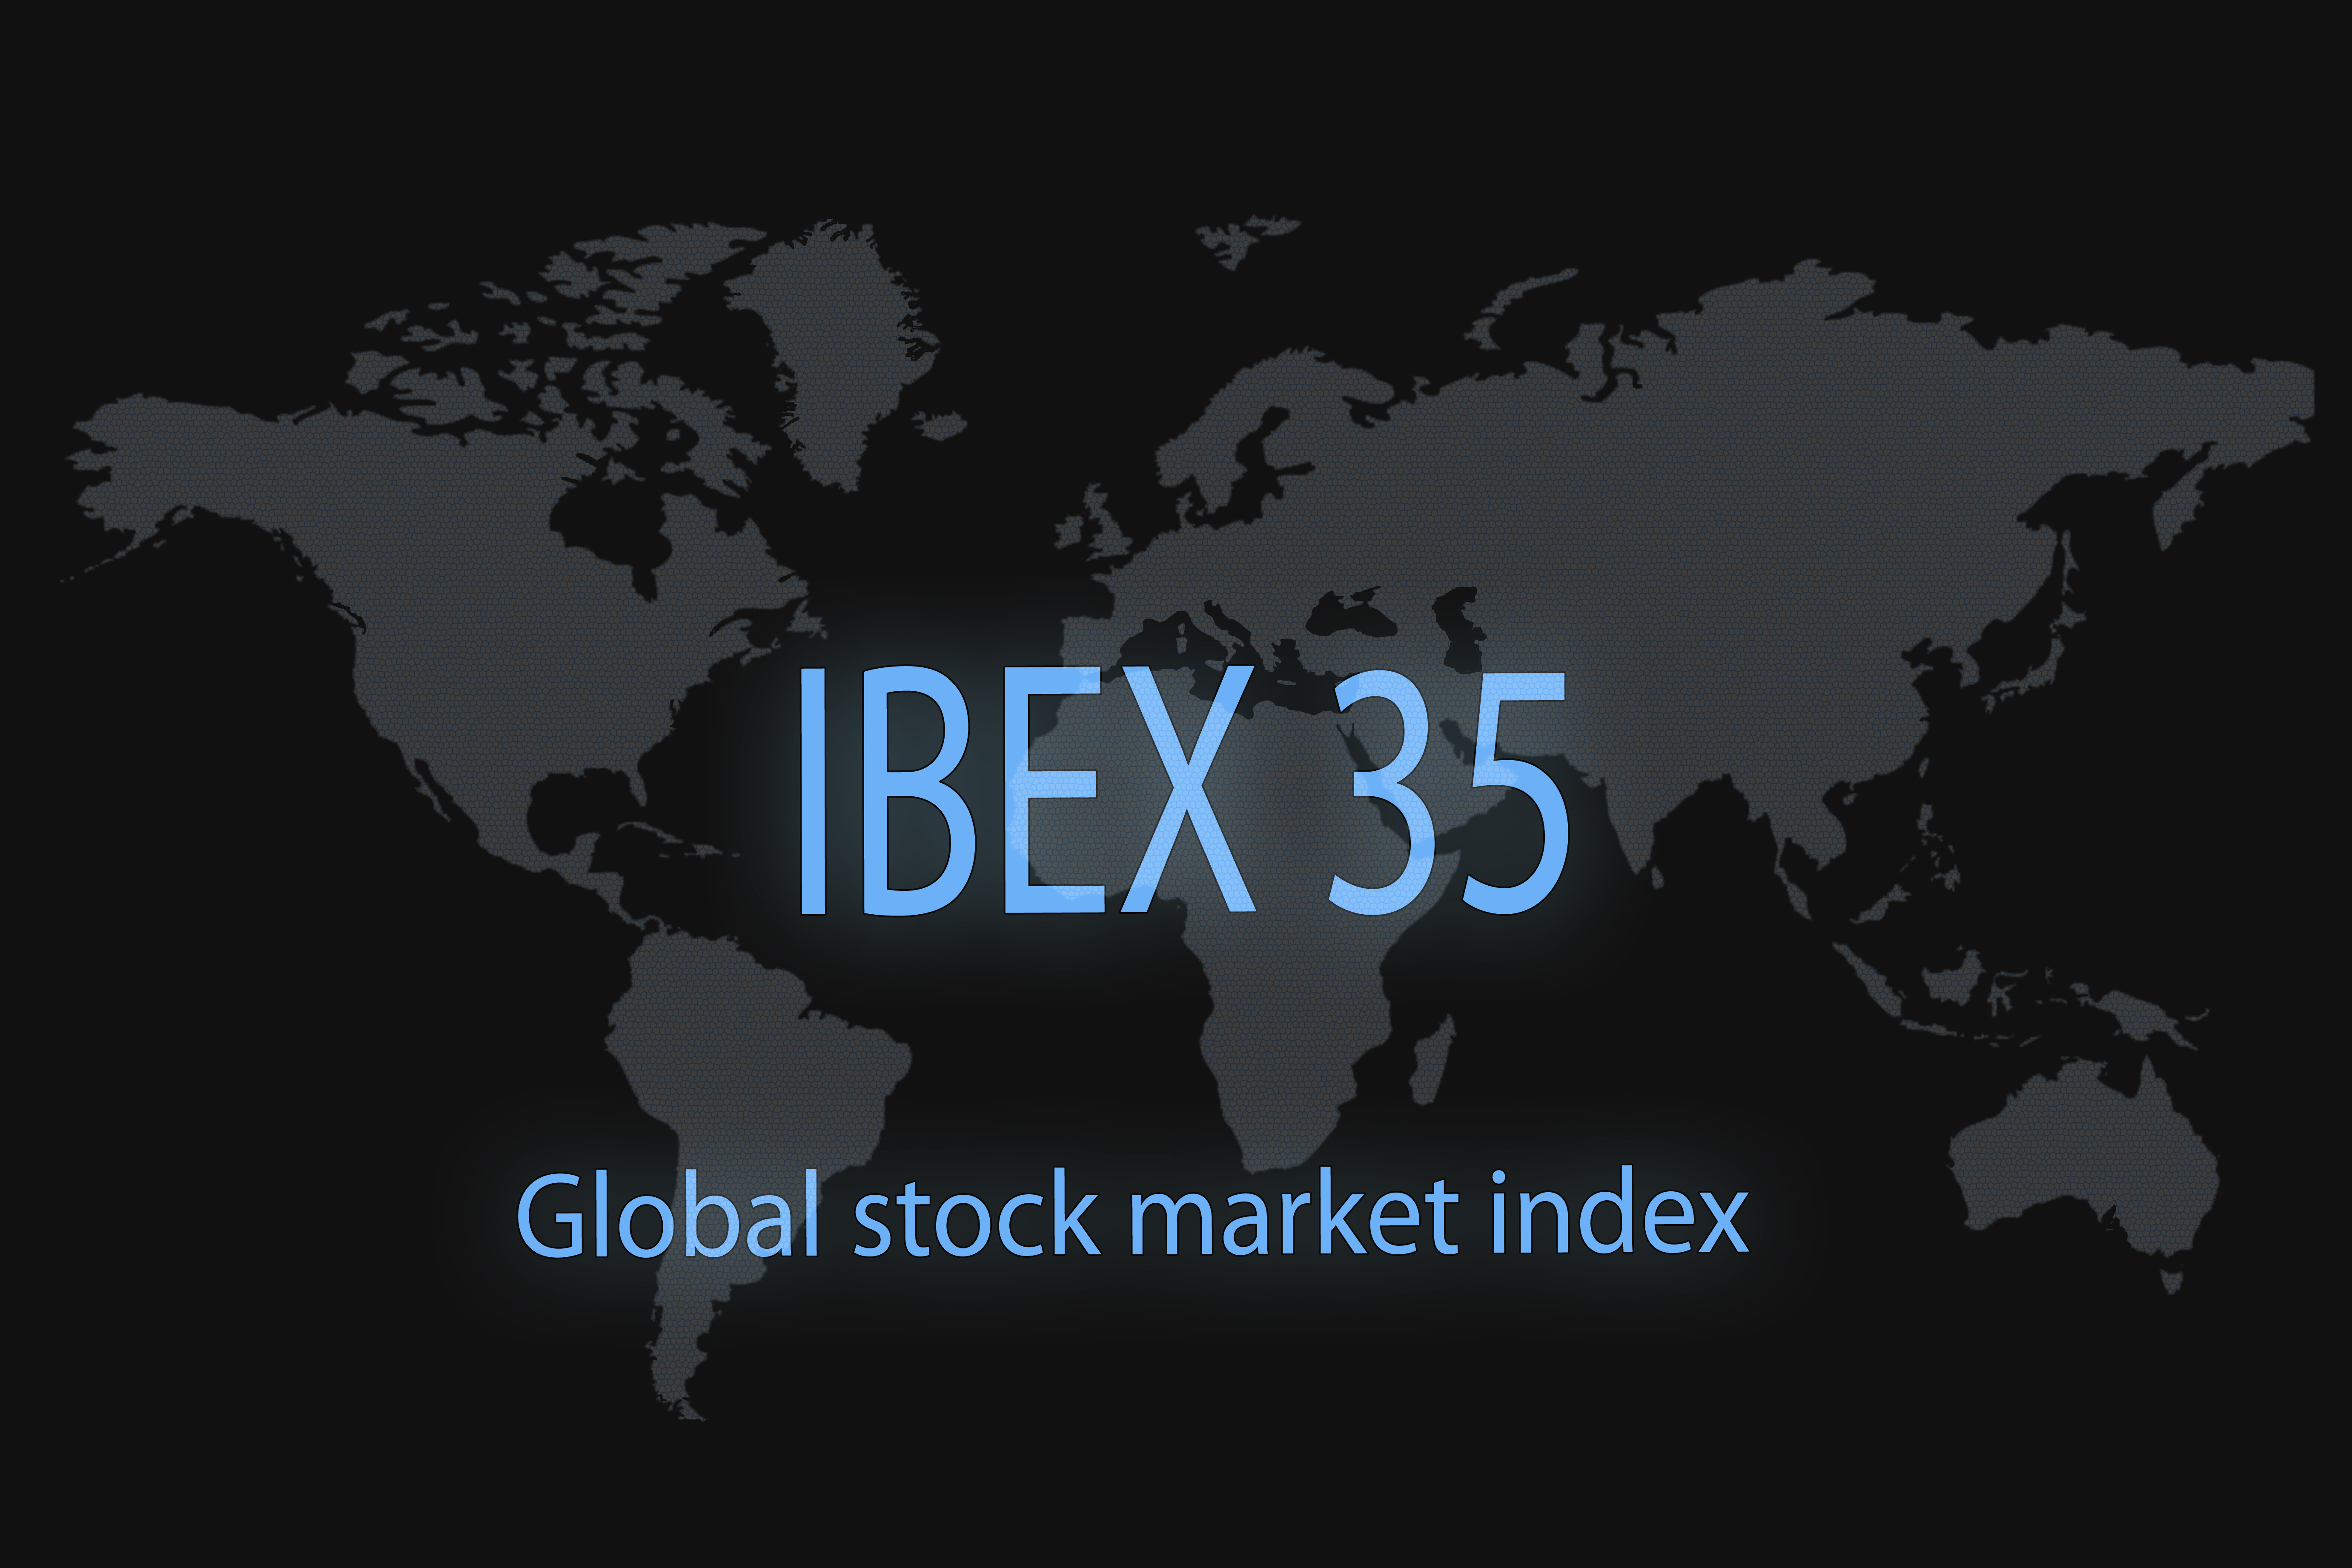 Fluidra to become part of the IBEX 35